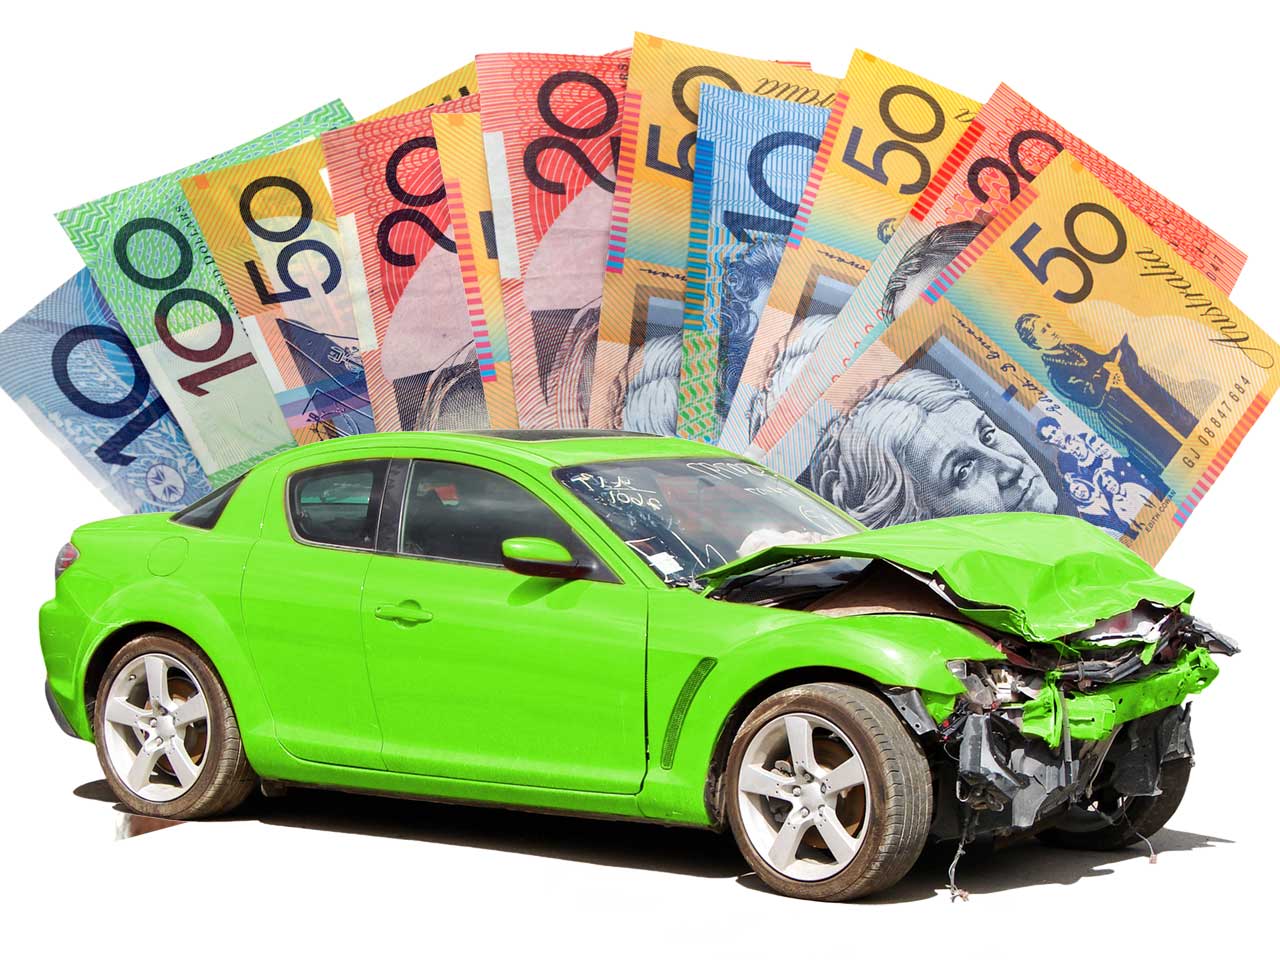 How to get rid of my car for cash near me